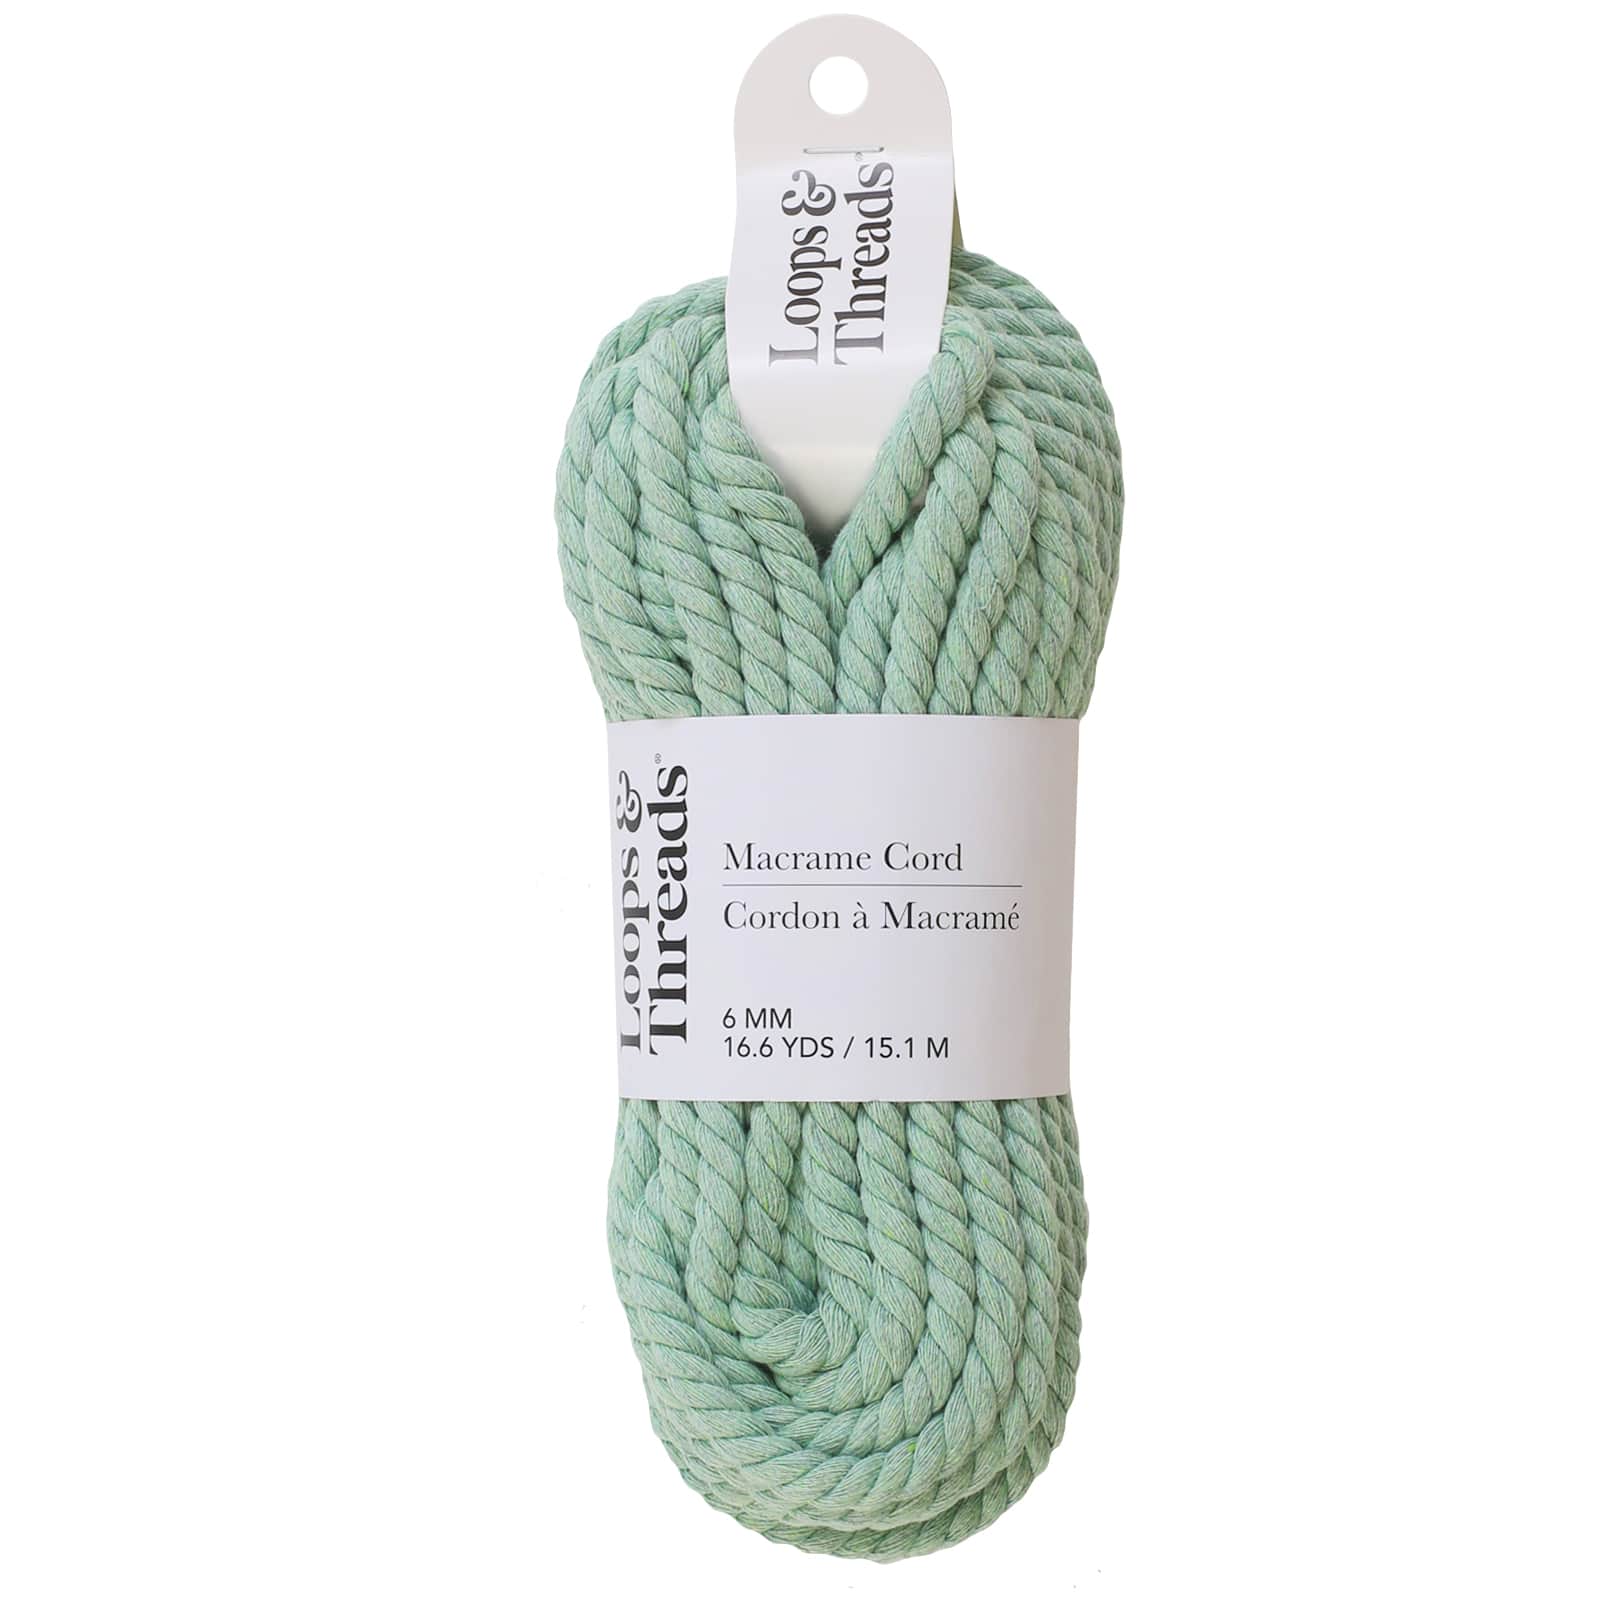 Macramé Cotton Cord by Loops & Threads®, 25yd.